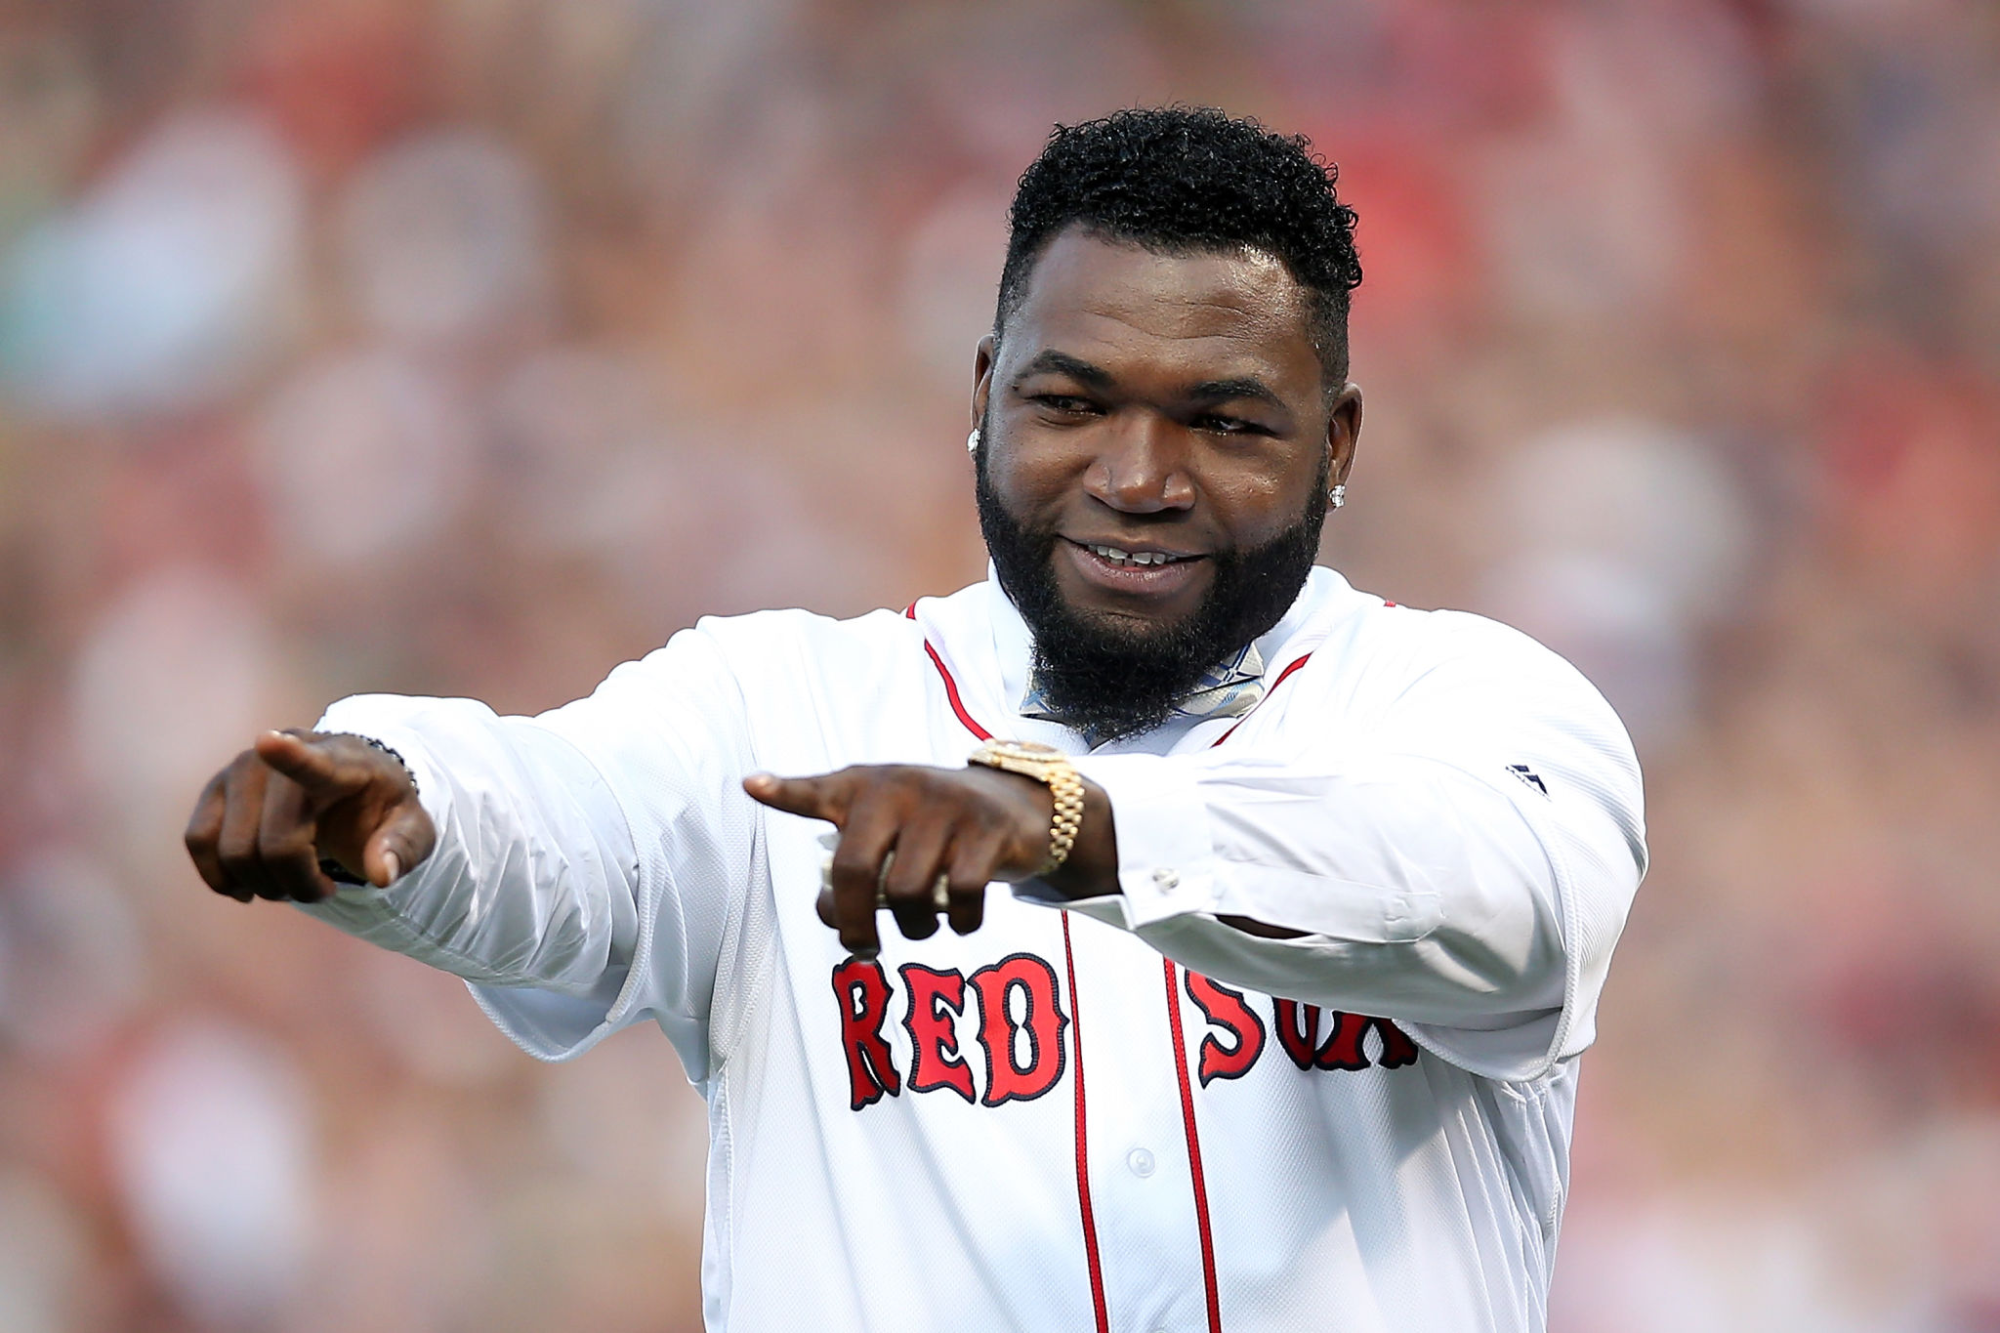 Former Boston Red Sox player David Ortiz points and smiles during his jersey retirement ceremony.